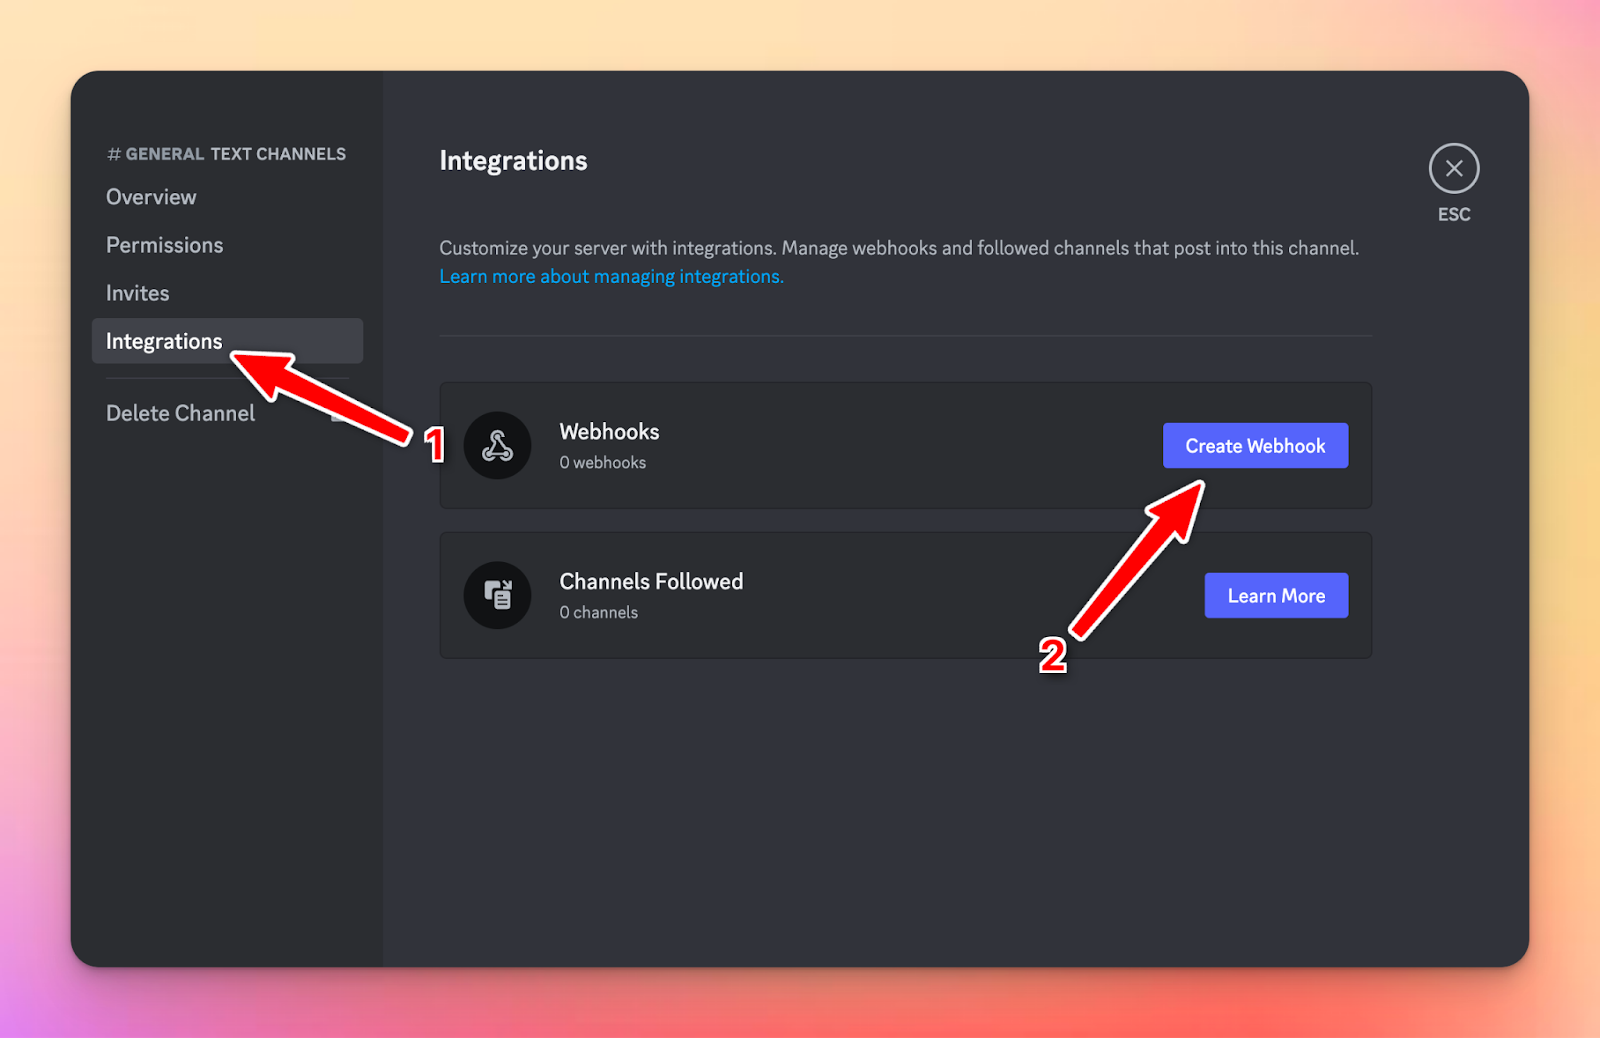 Discord Webhook, but with buttons? How can I do that? (url button for  example) 🤔 : r/discordapp